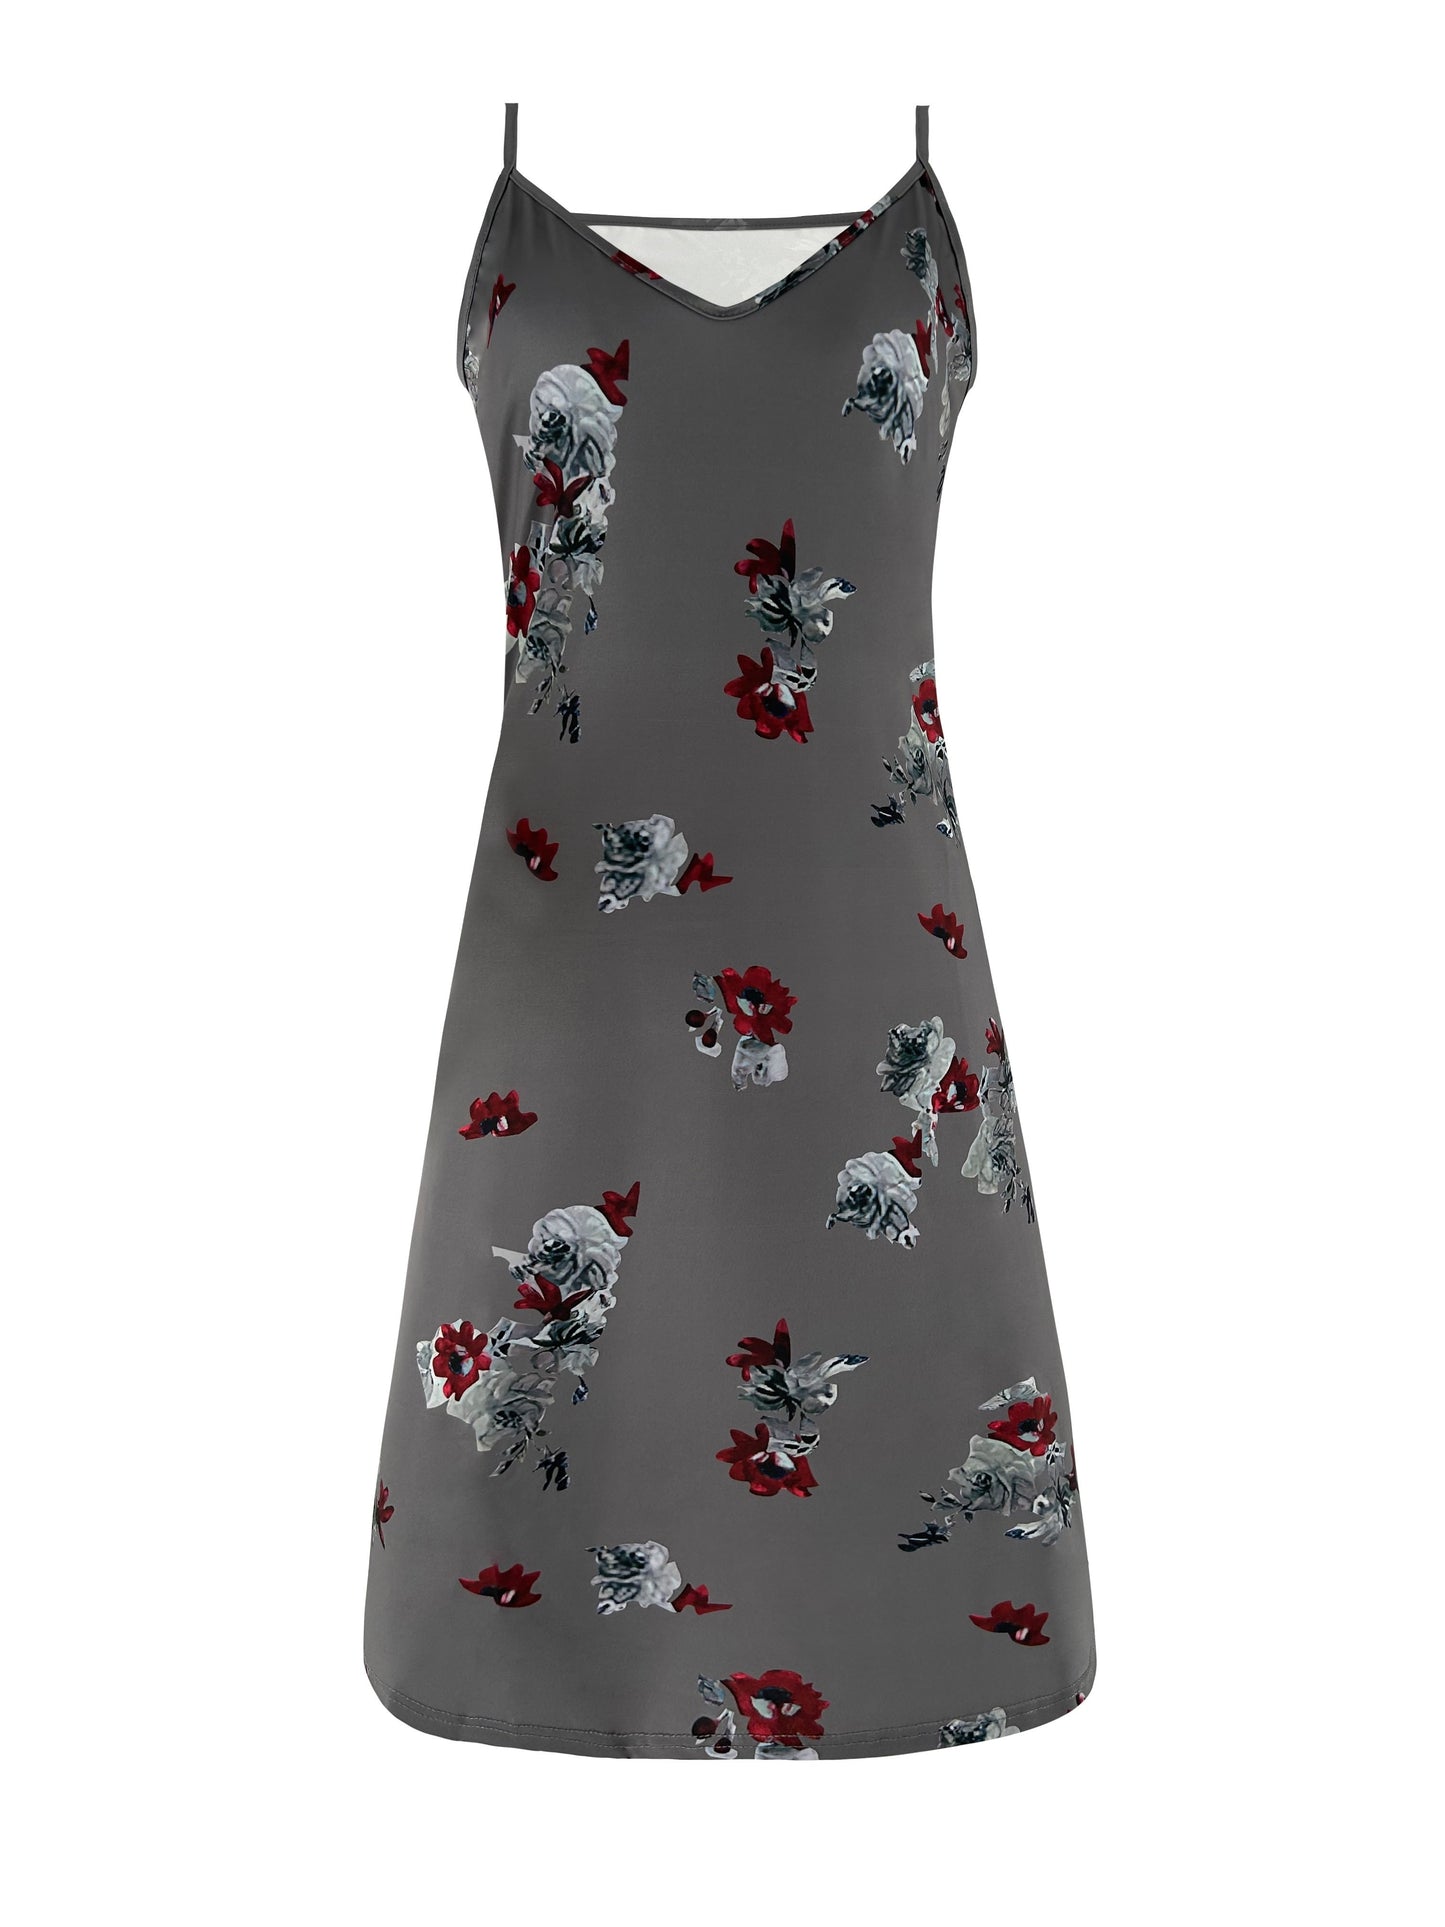 Floral Print Spaghetti Dress, Casual Backless Cami Dress For Summer, Women's Clothing